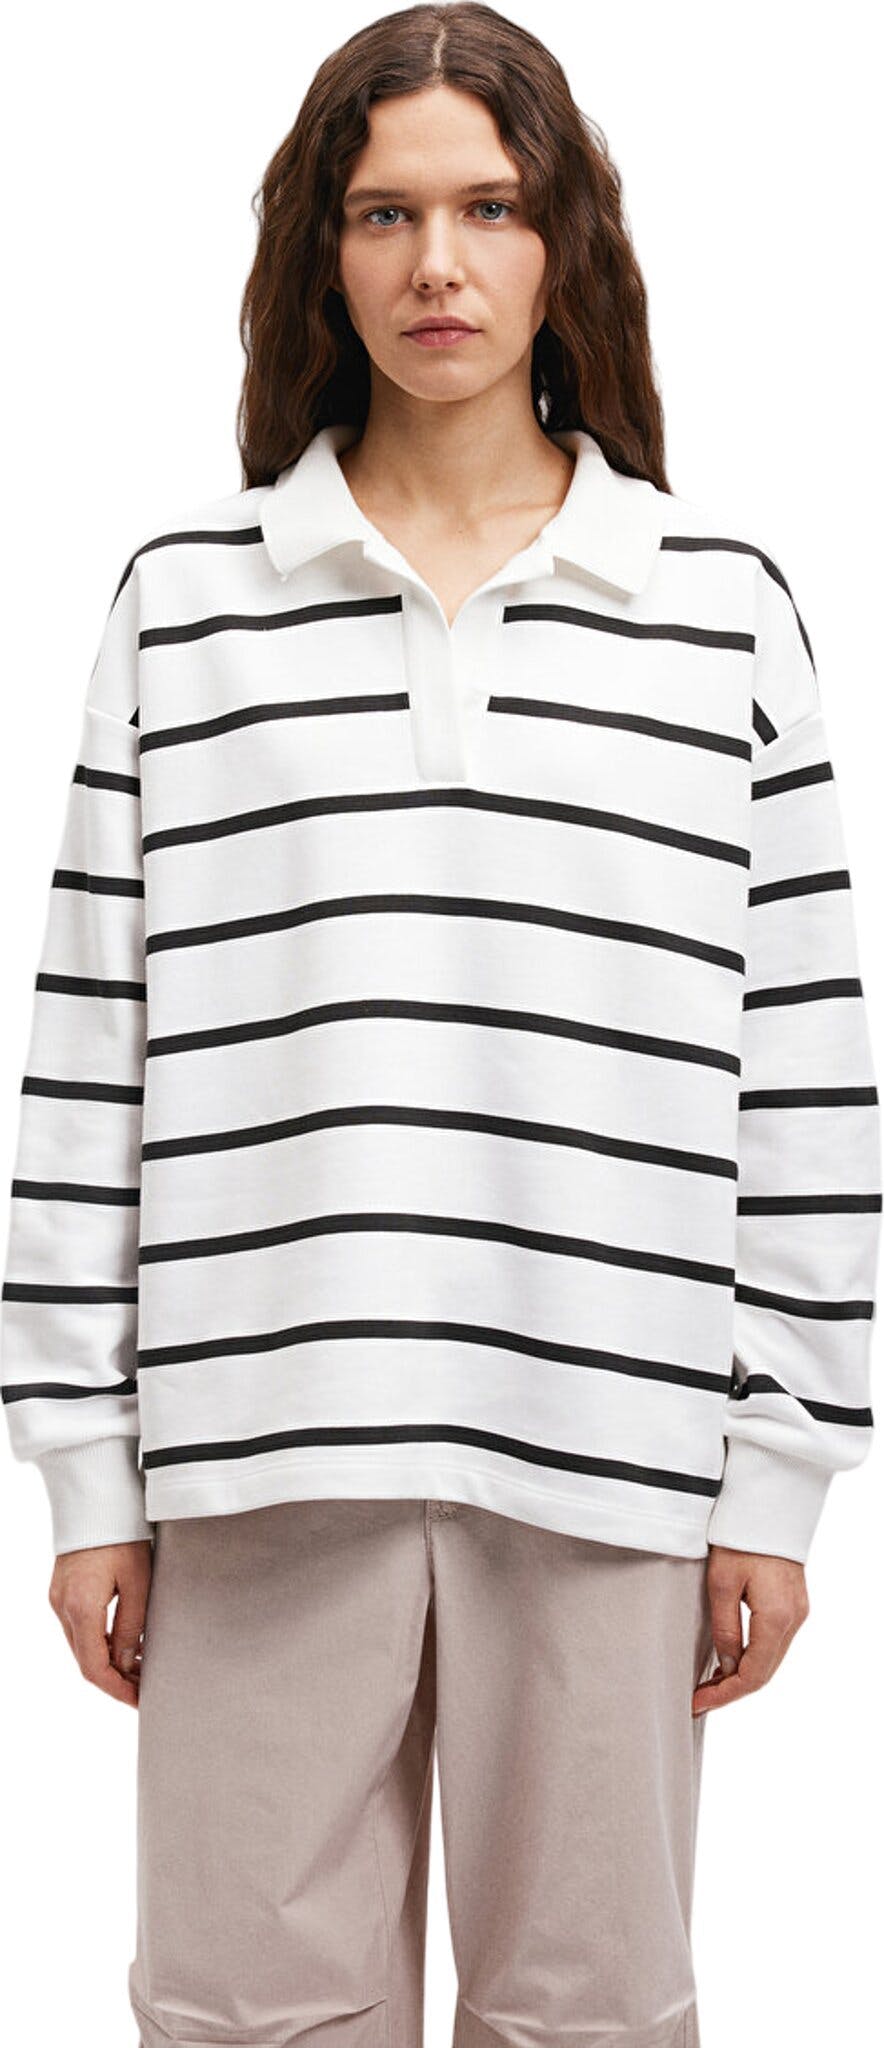 Product image for Long Sleeve Striped Polo Sweatshirt - Women's